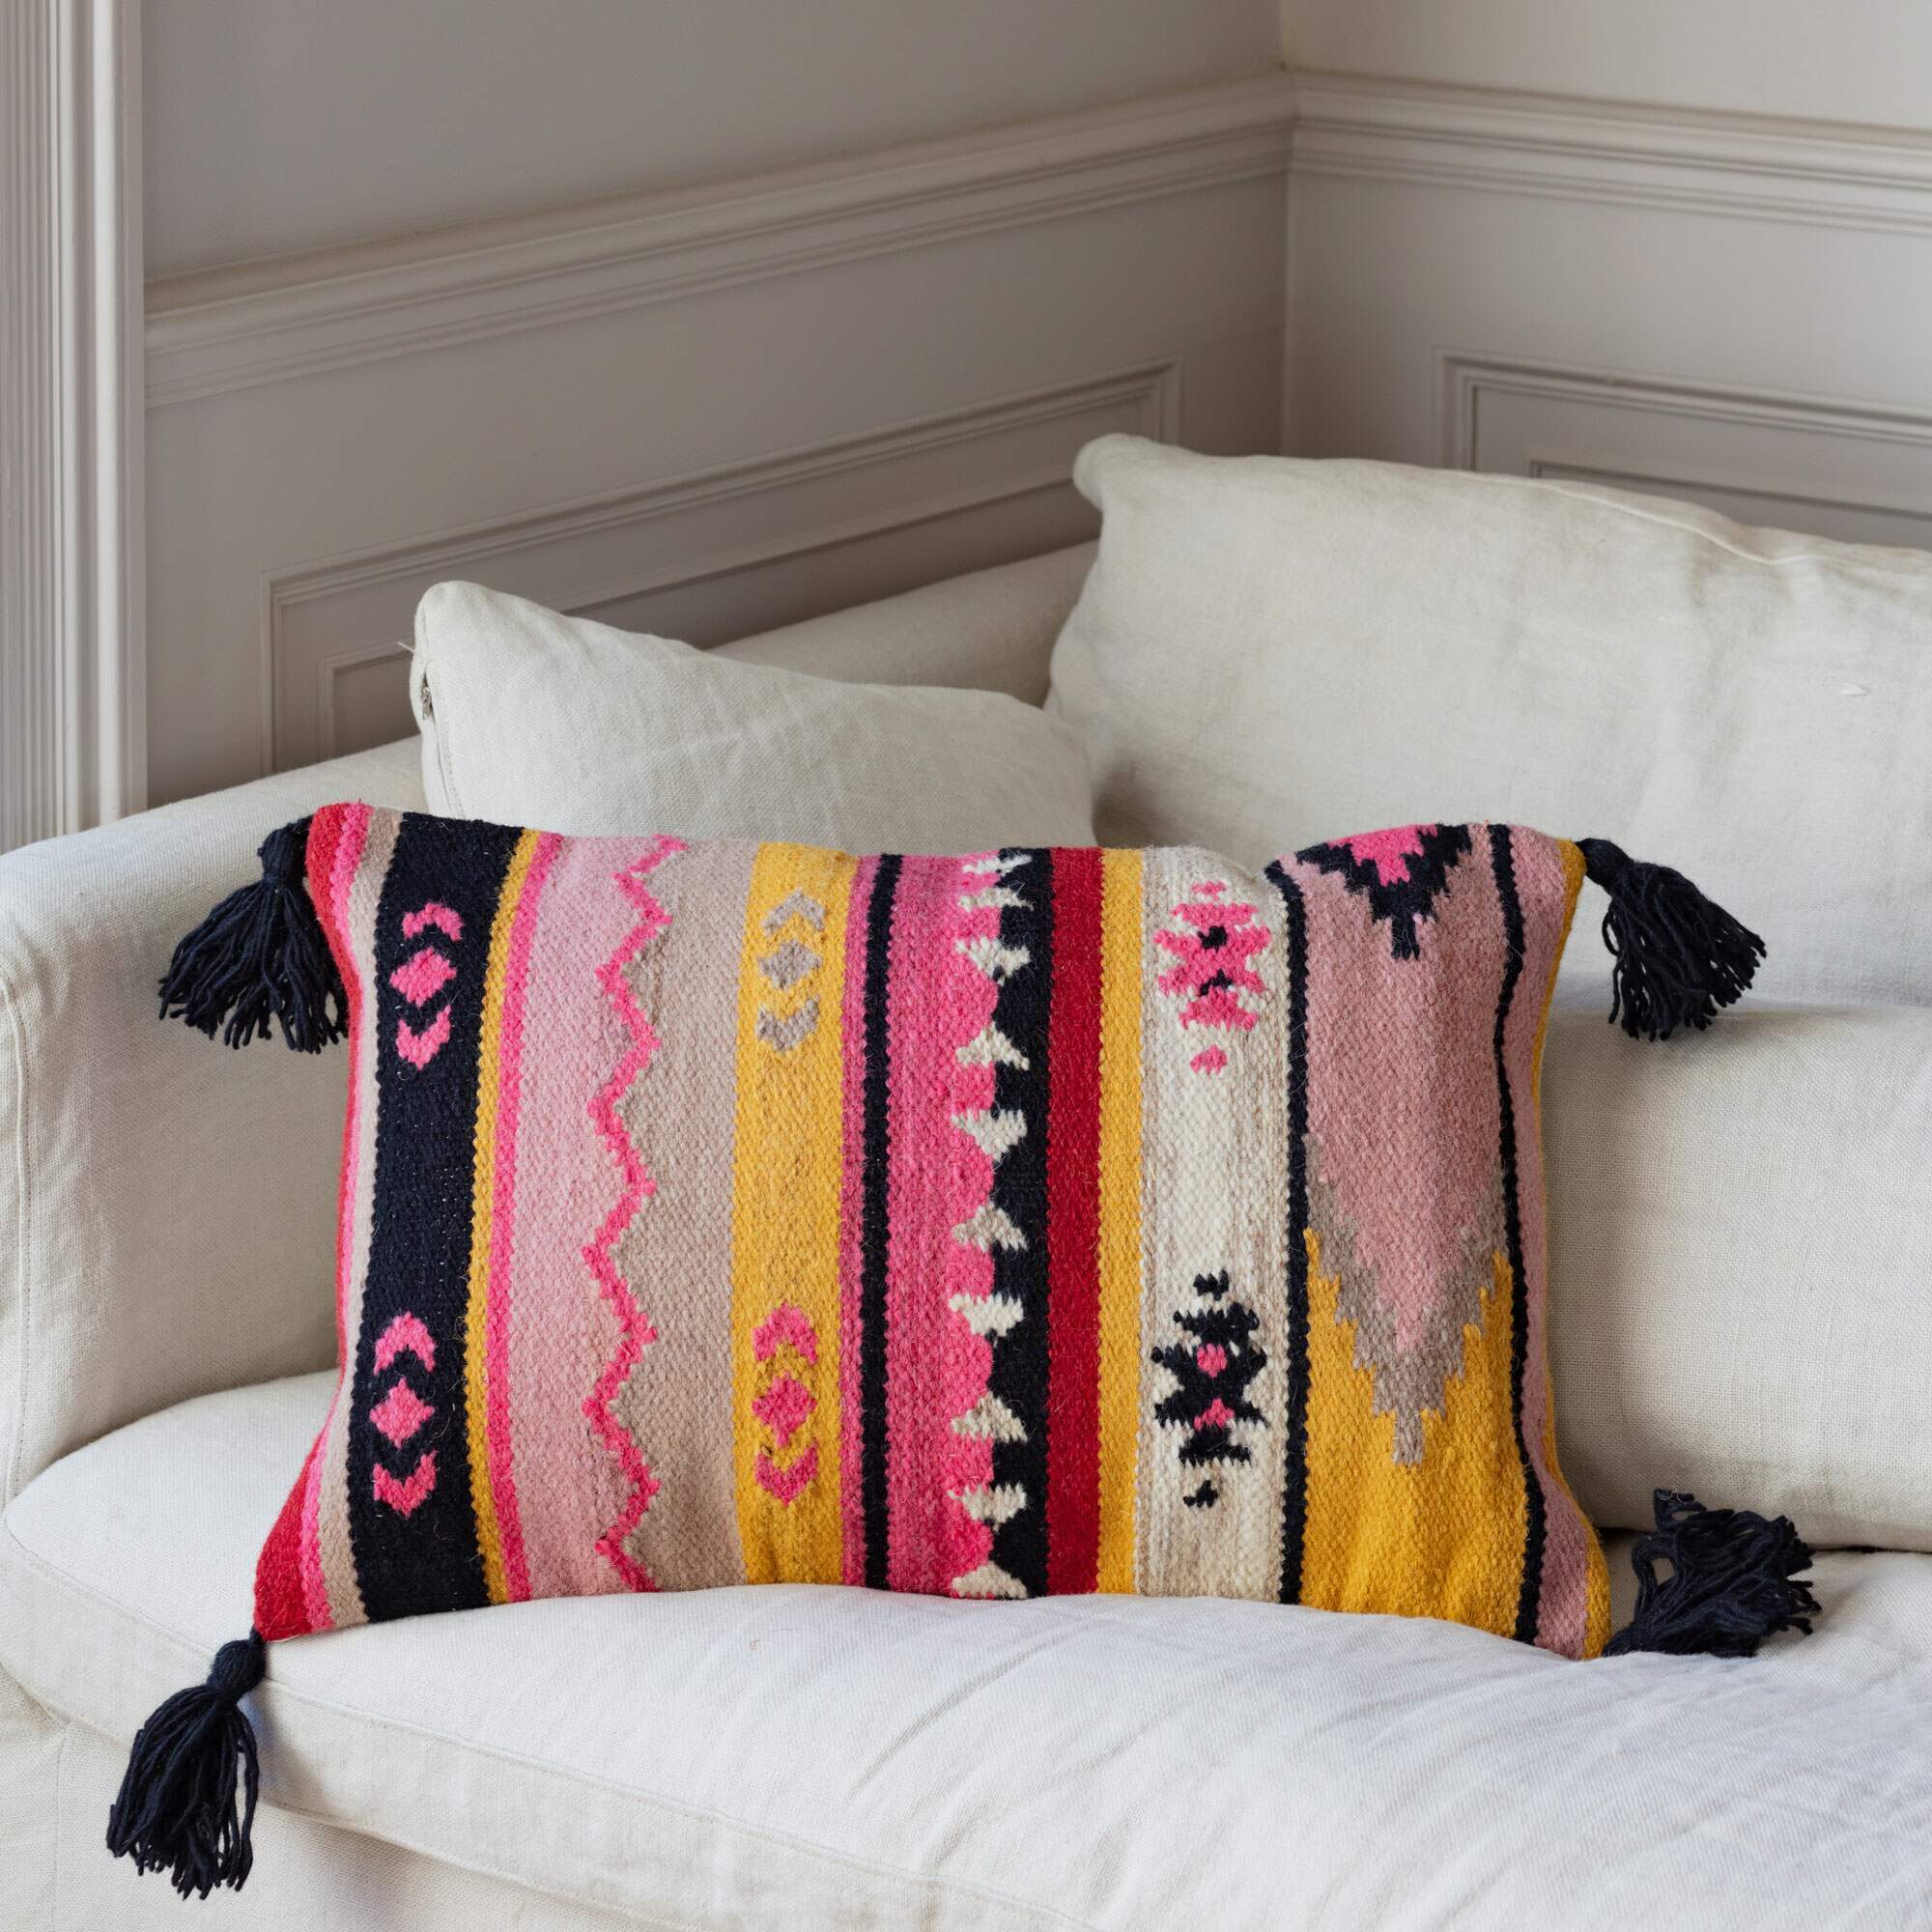 Read more about Graham and green asmee rectangular chevron cushion